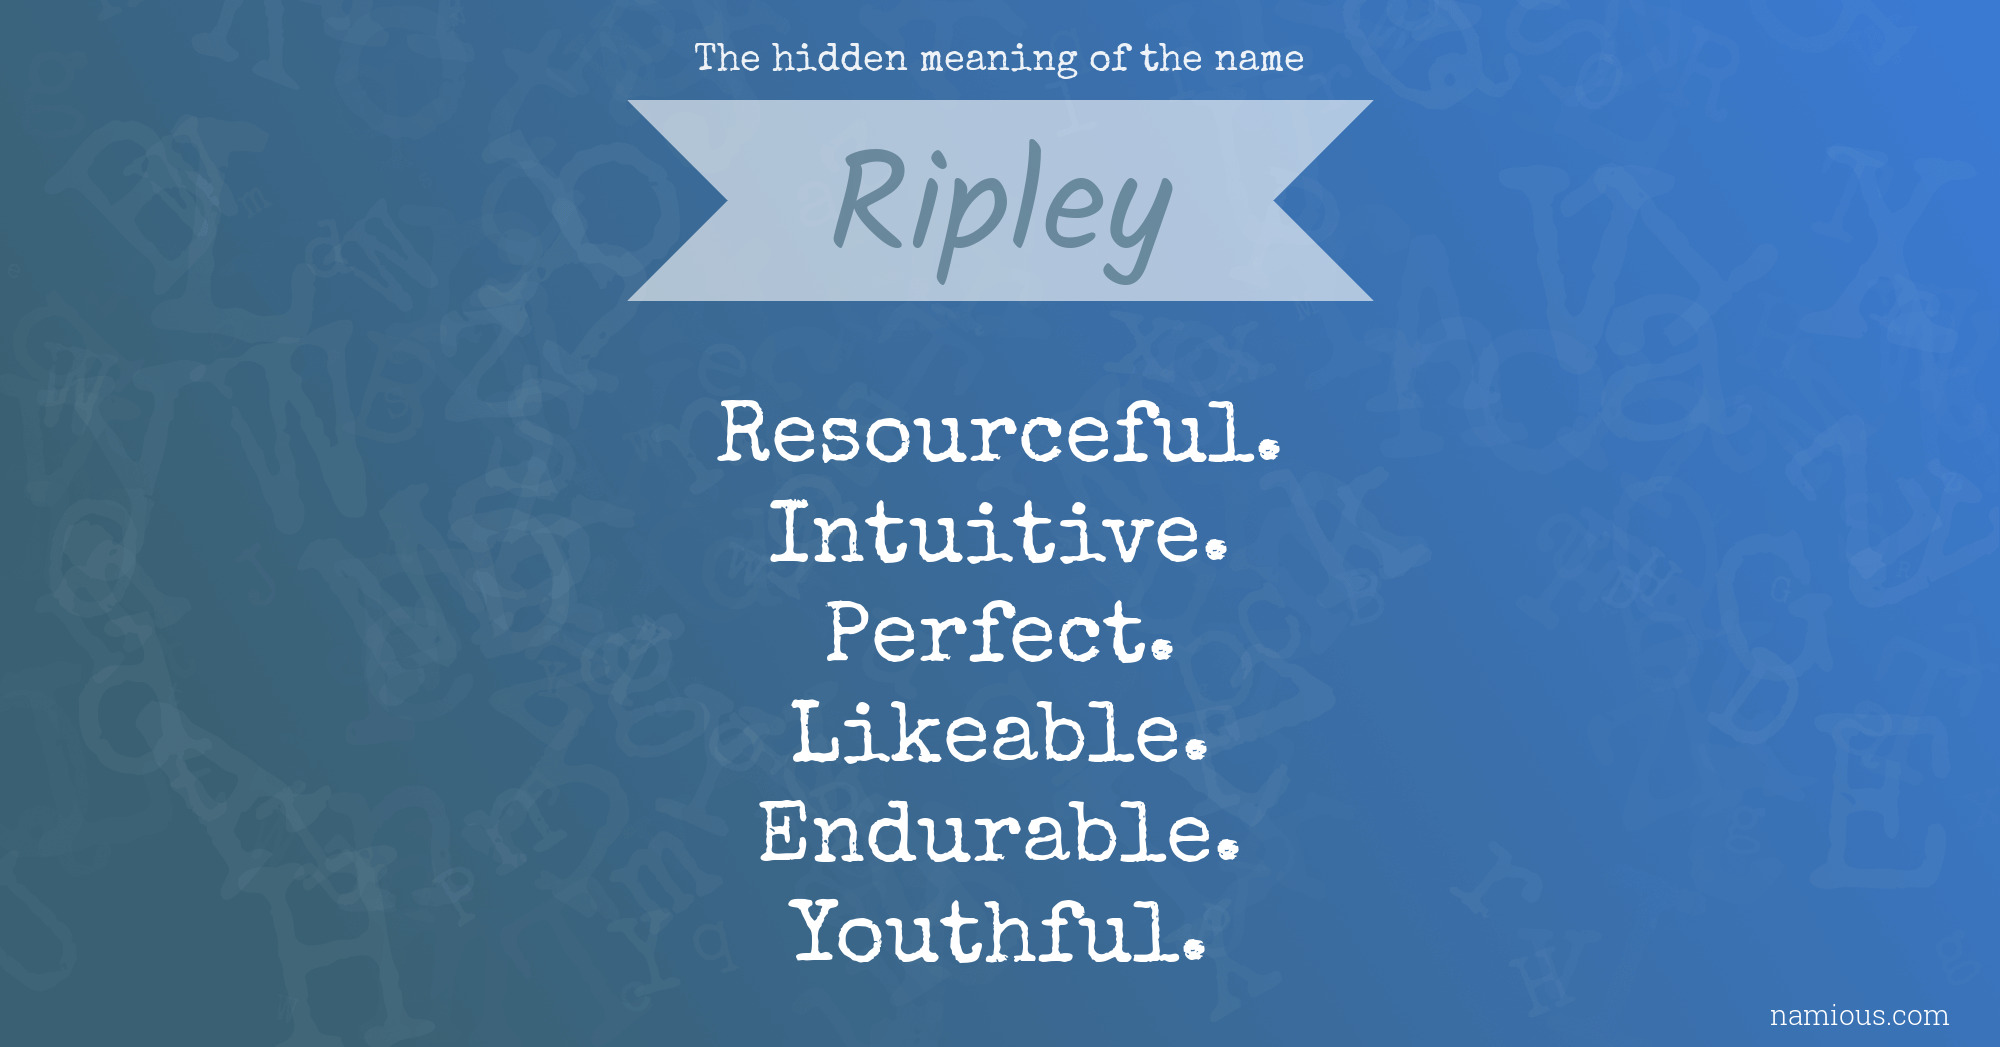 The hidden meaning of the name Ripley